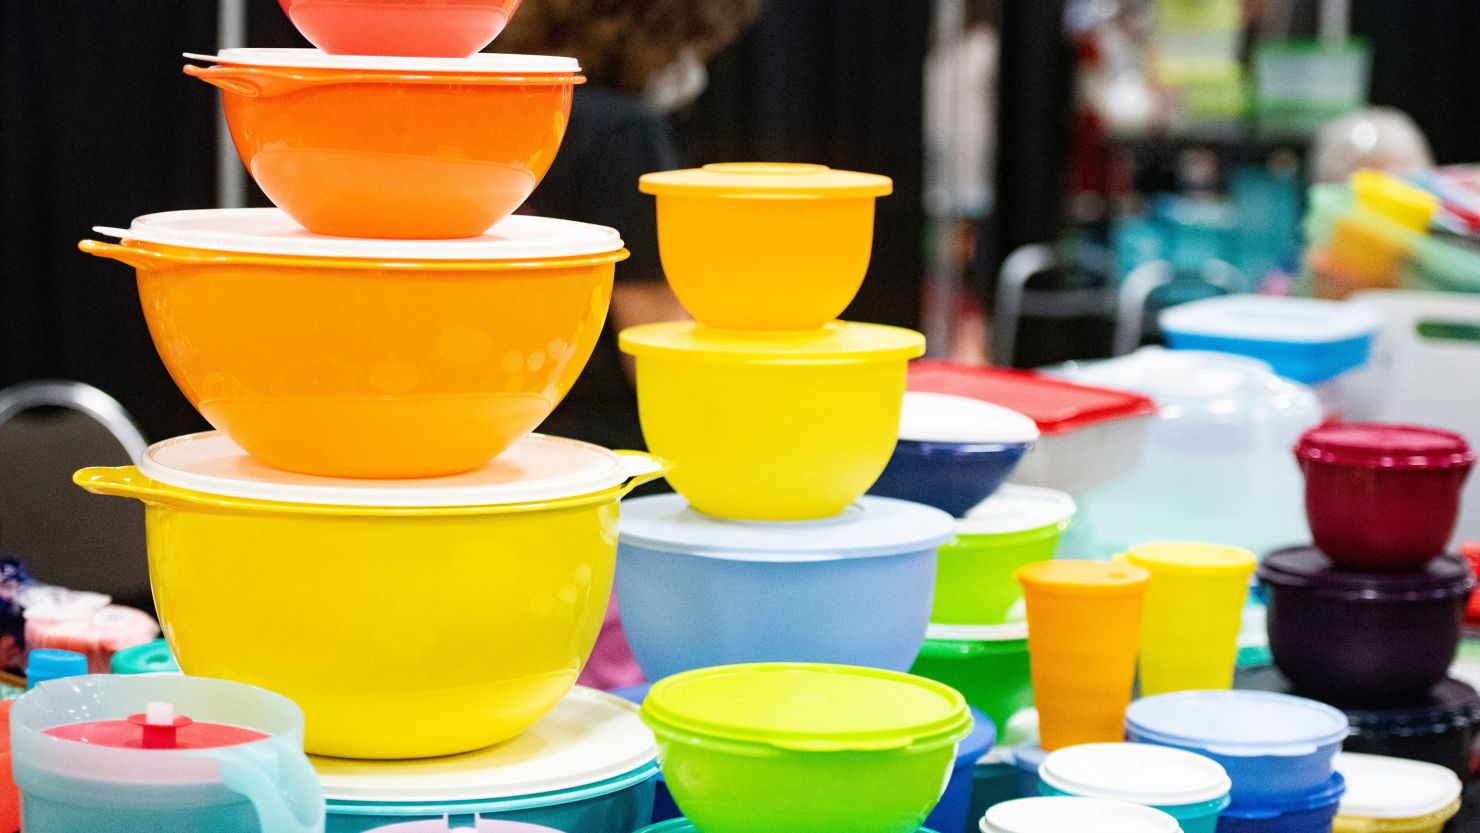 This New $10 Tupperware Bowl Will Keep your Food Fresher Than Ever